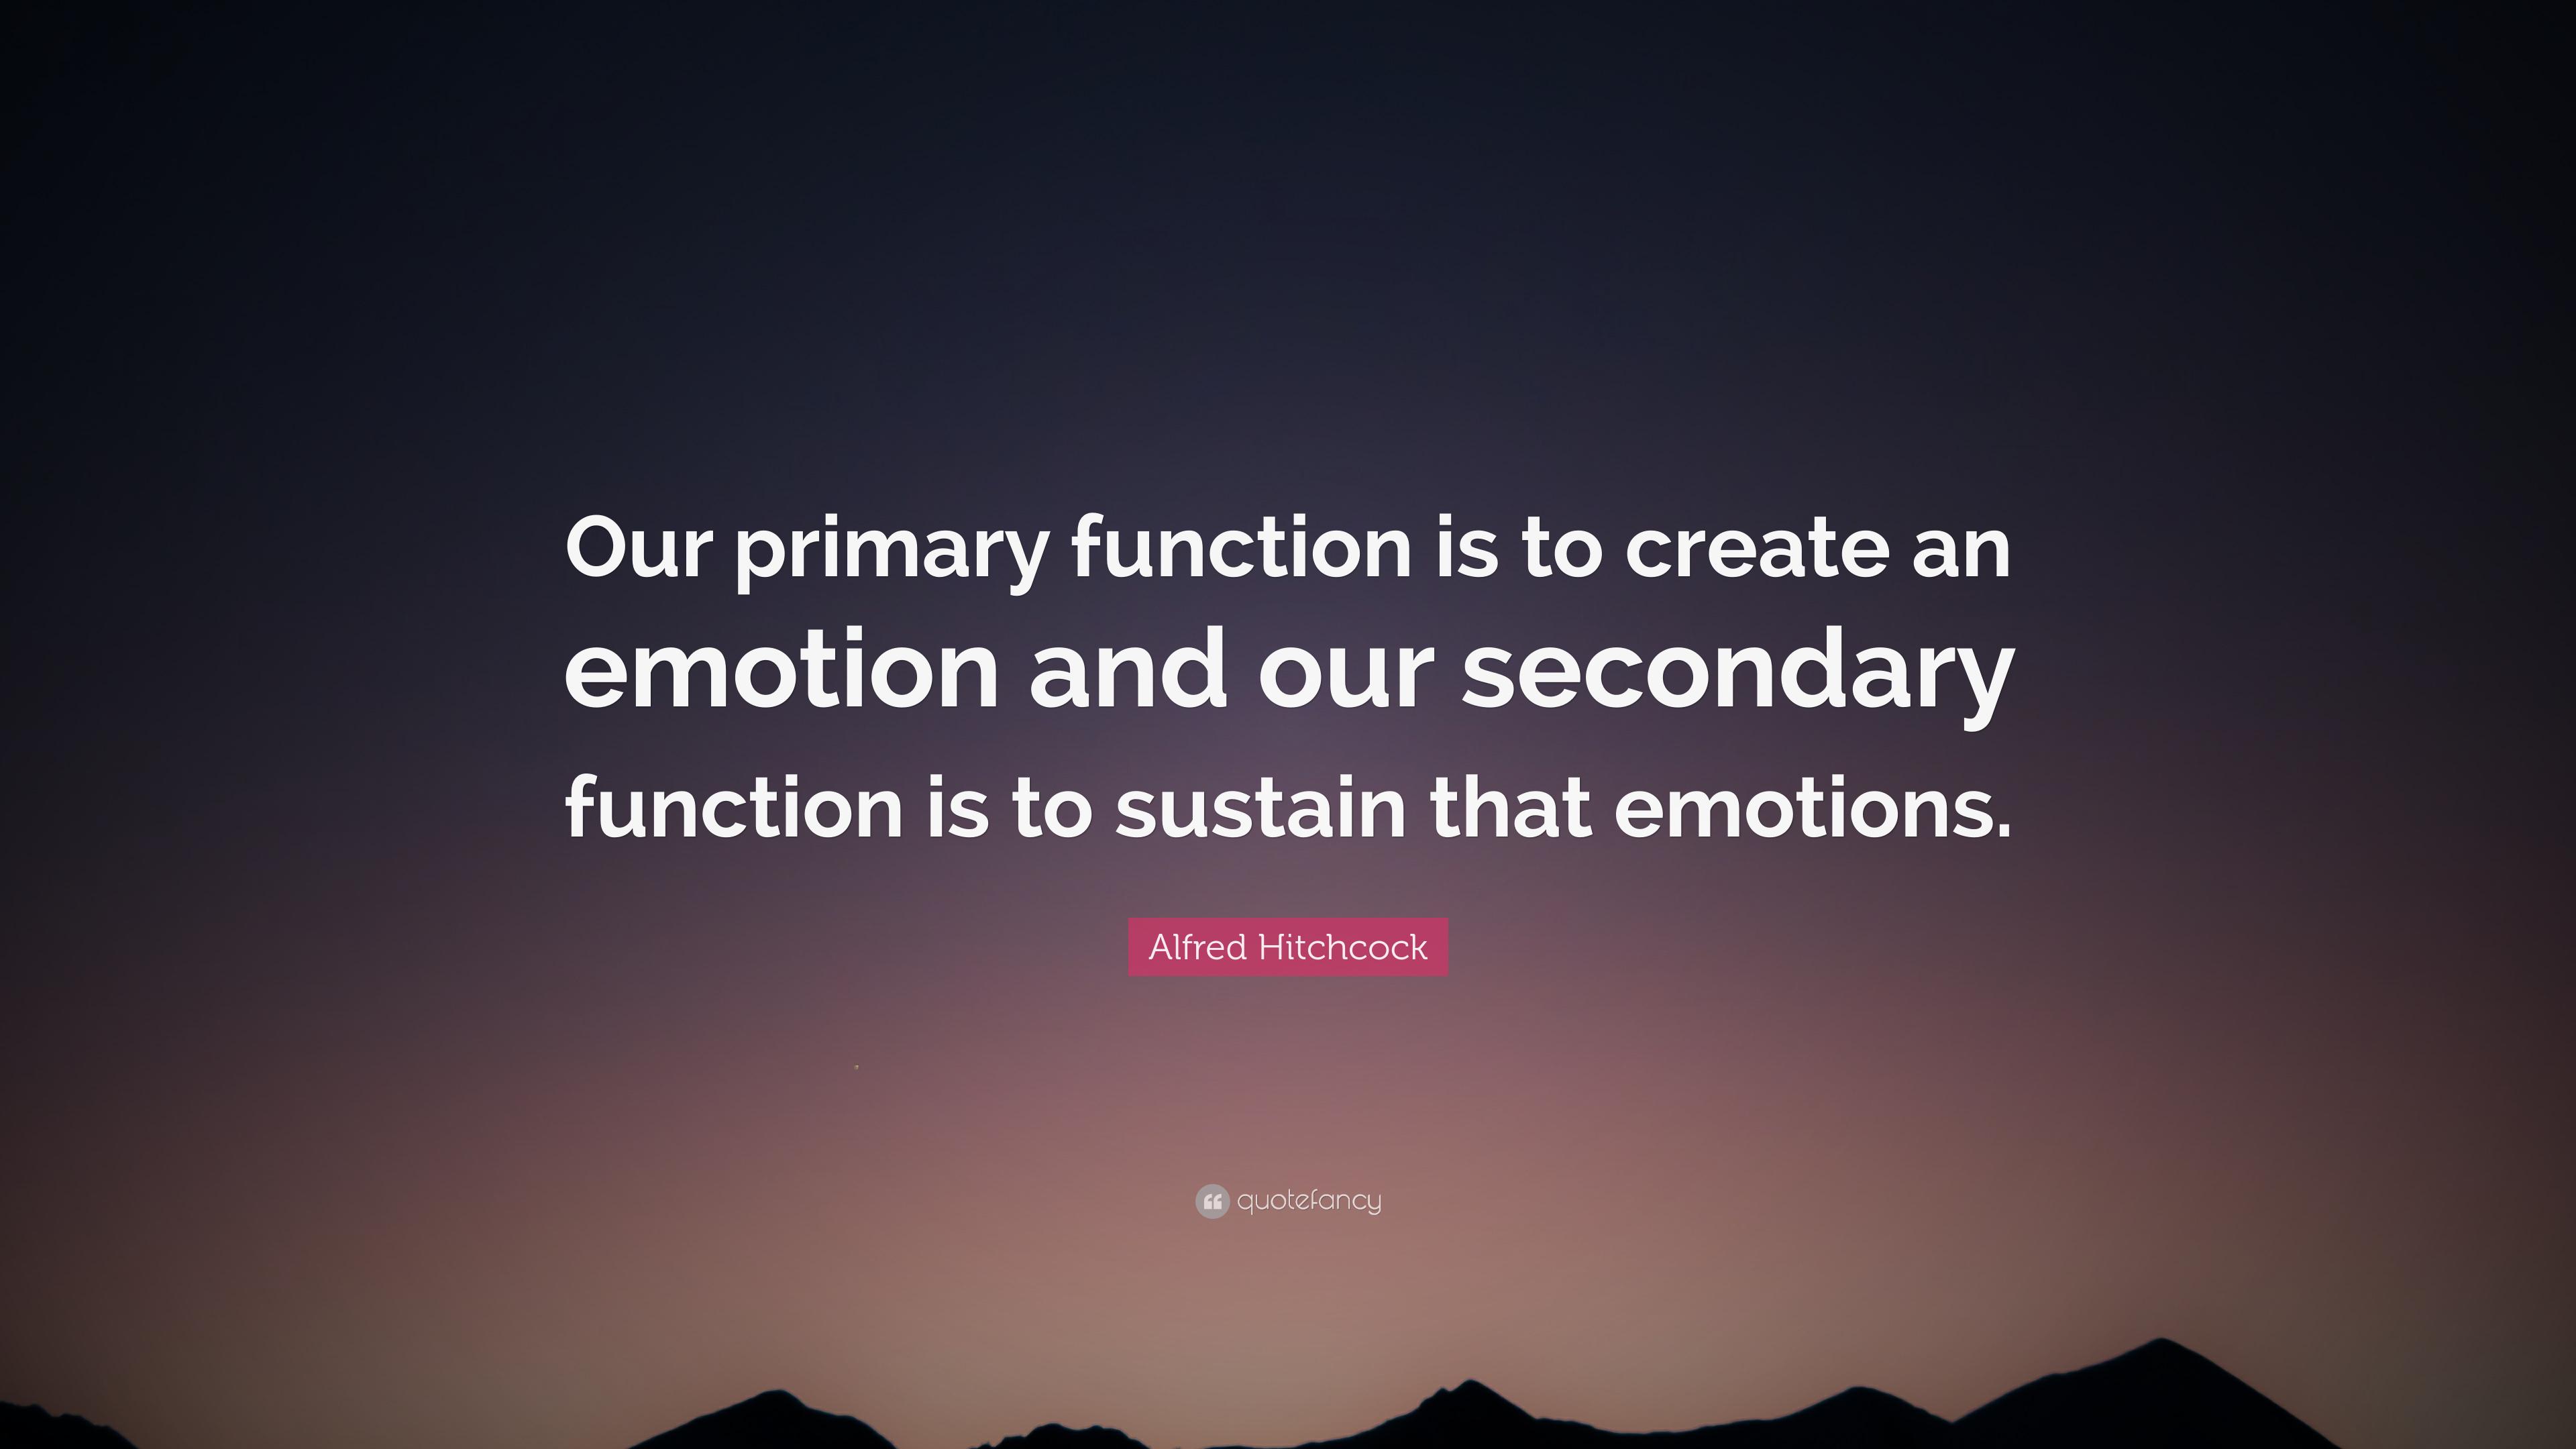 Alfred Hitchcock Quote: “Our primary function is to create an